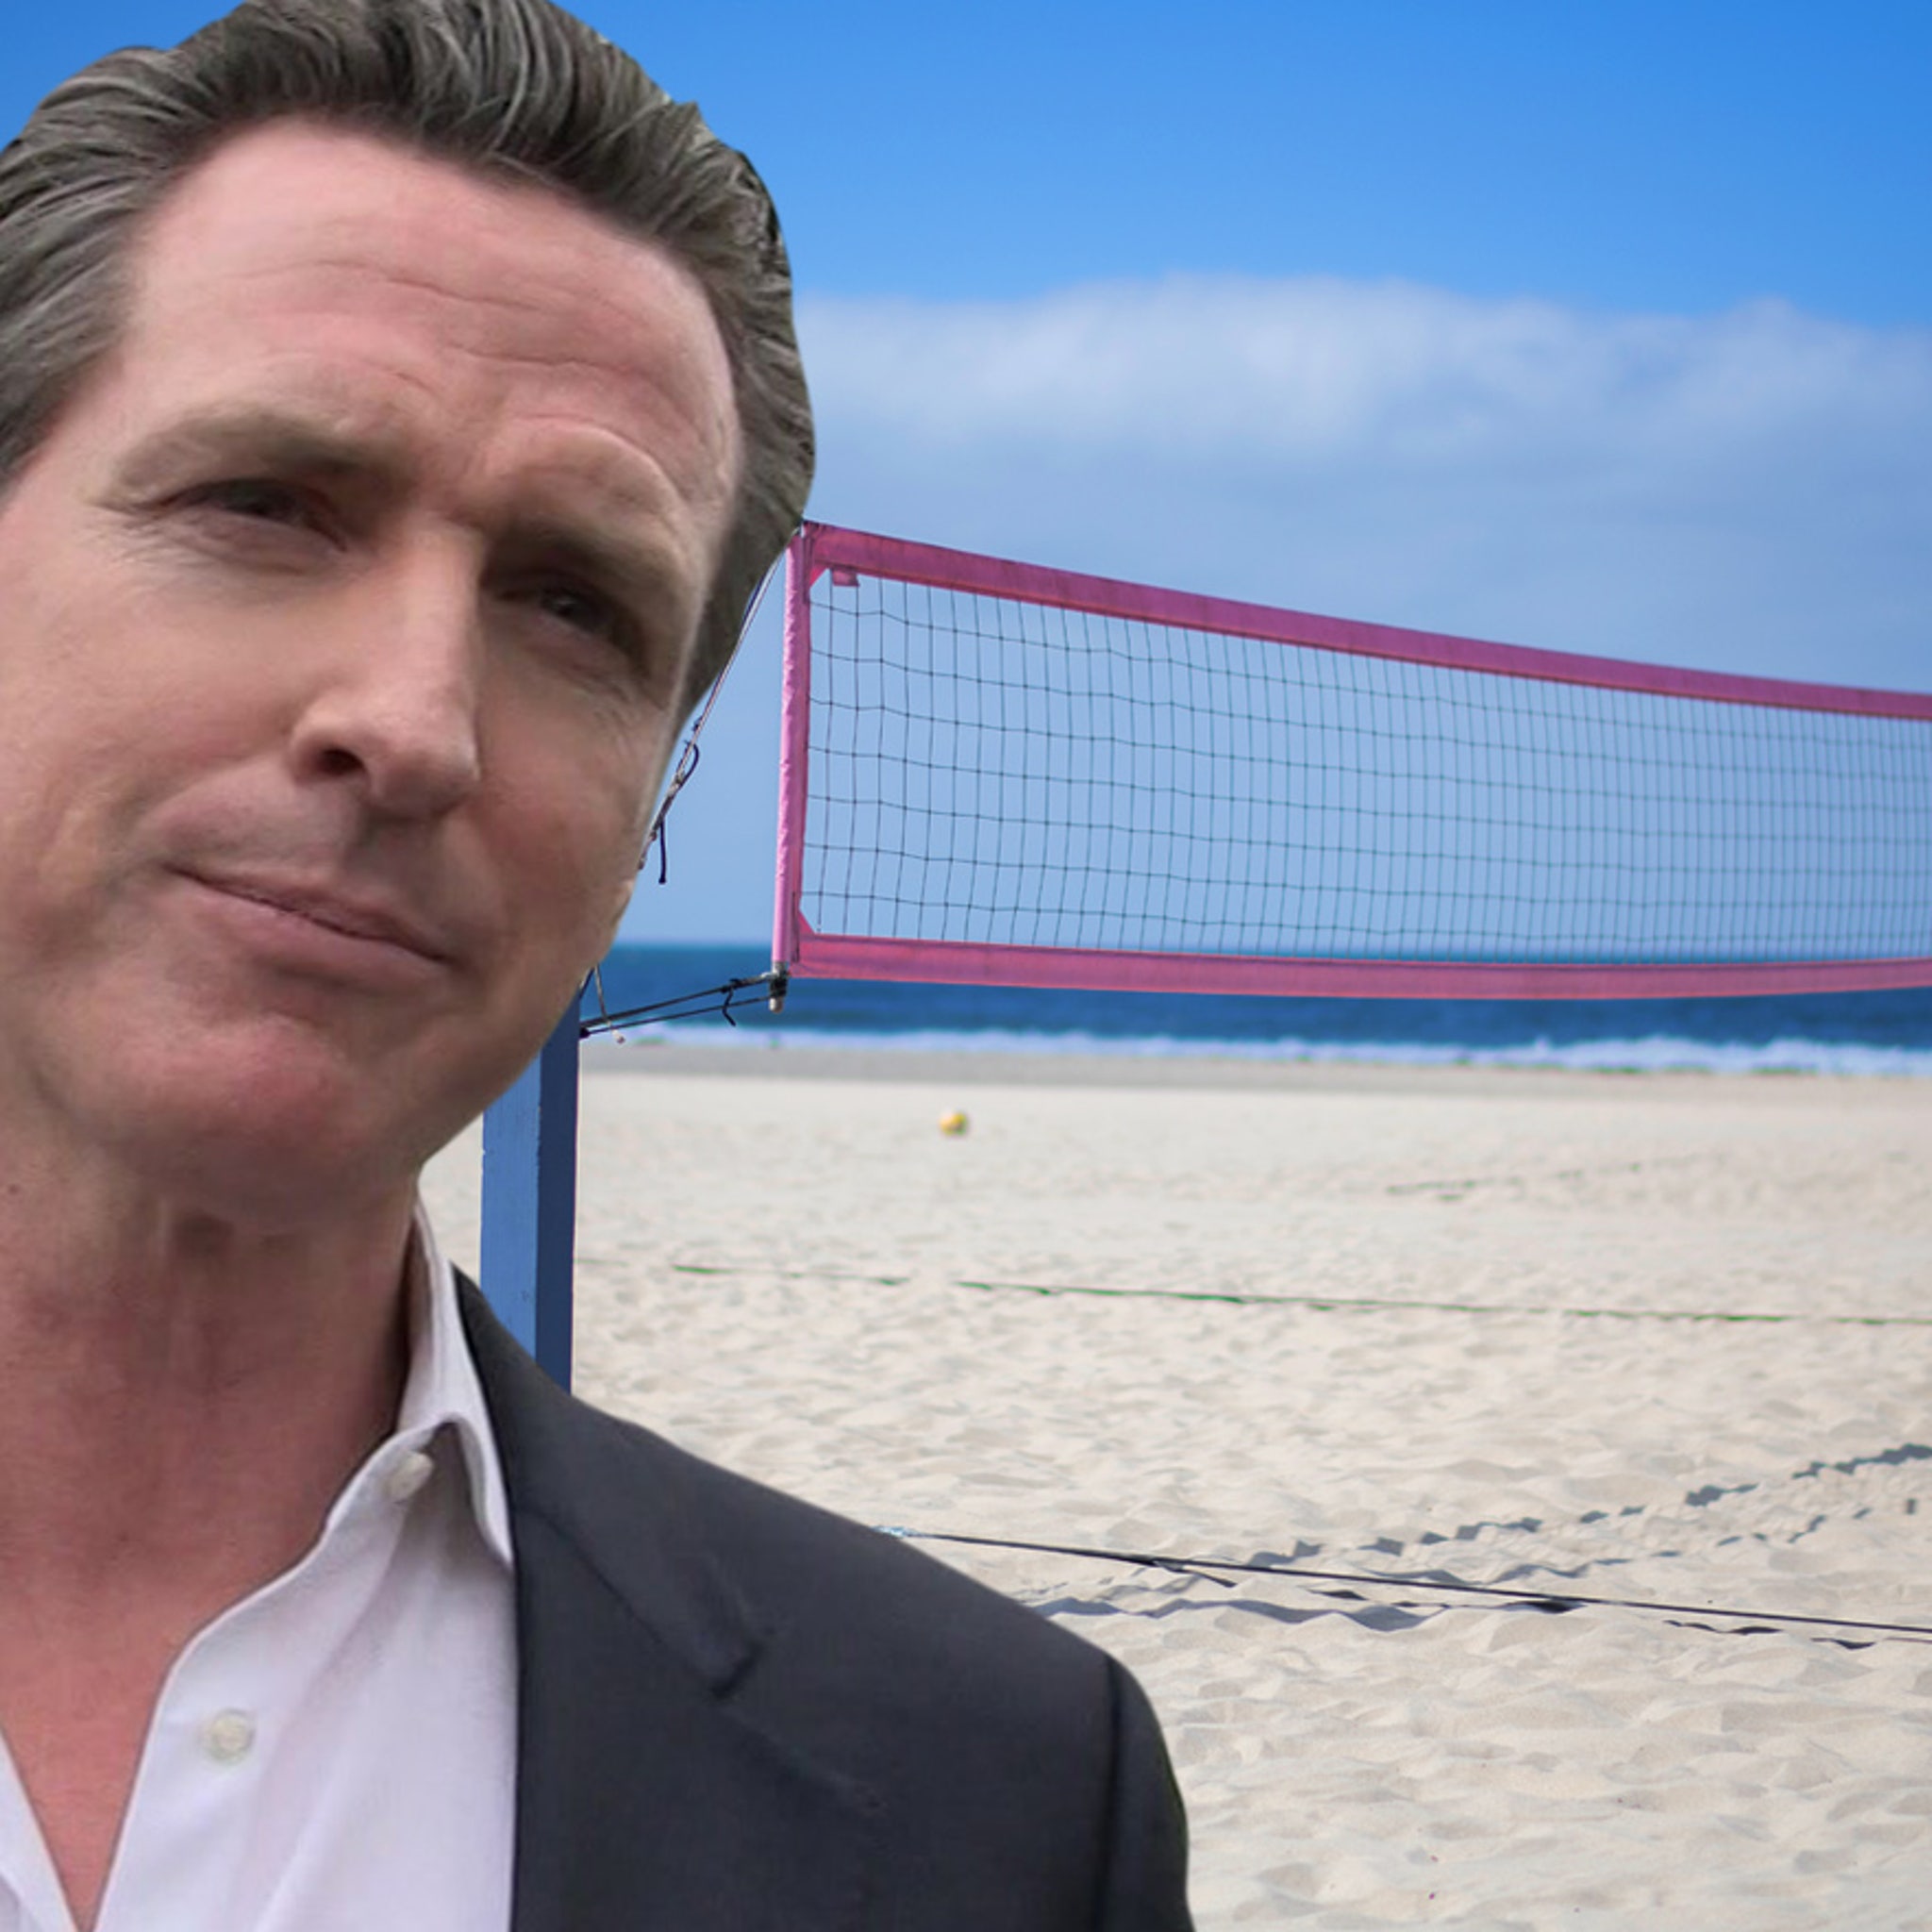 Gov Gavin Newsom Urged To Return Volleyball Nets To Ca Beaches Thousands Ink Petition